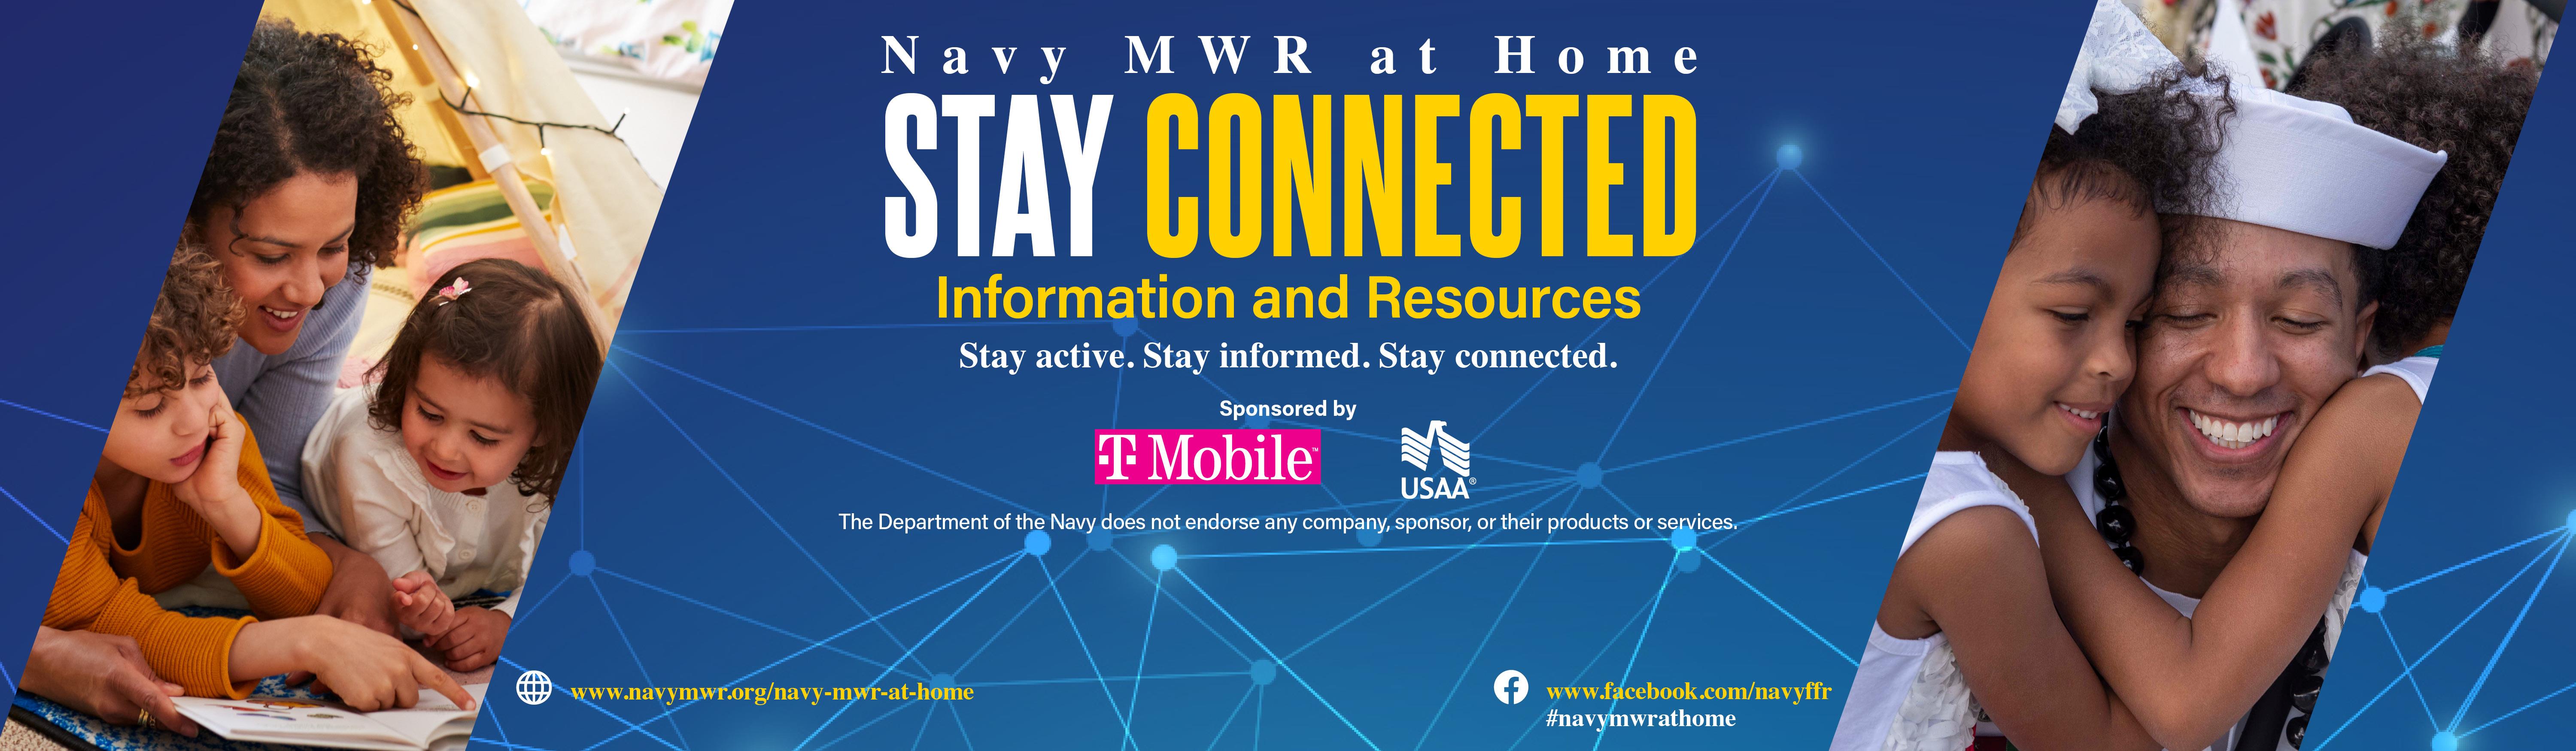 Navy MWR at Home_Stay Connected-web-bnnr-Sponsors3.jpg